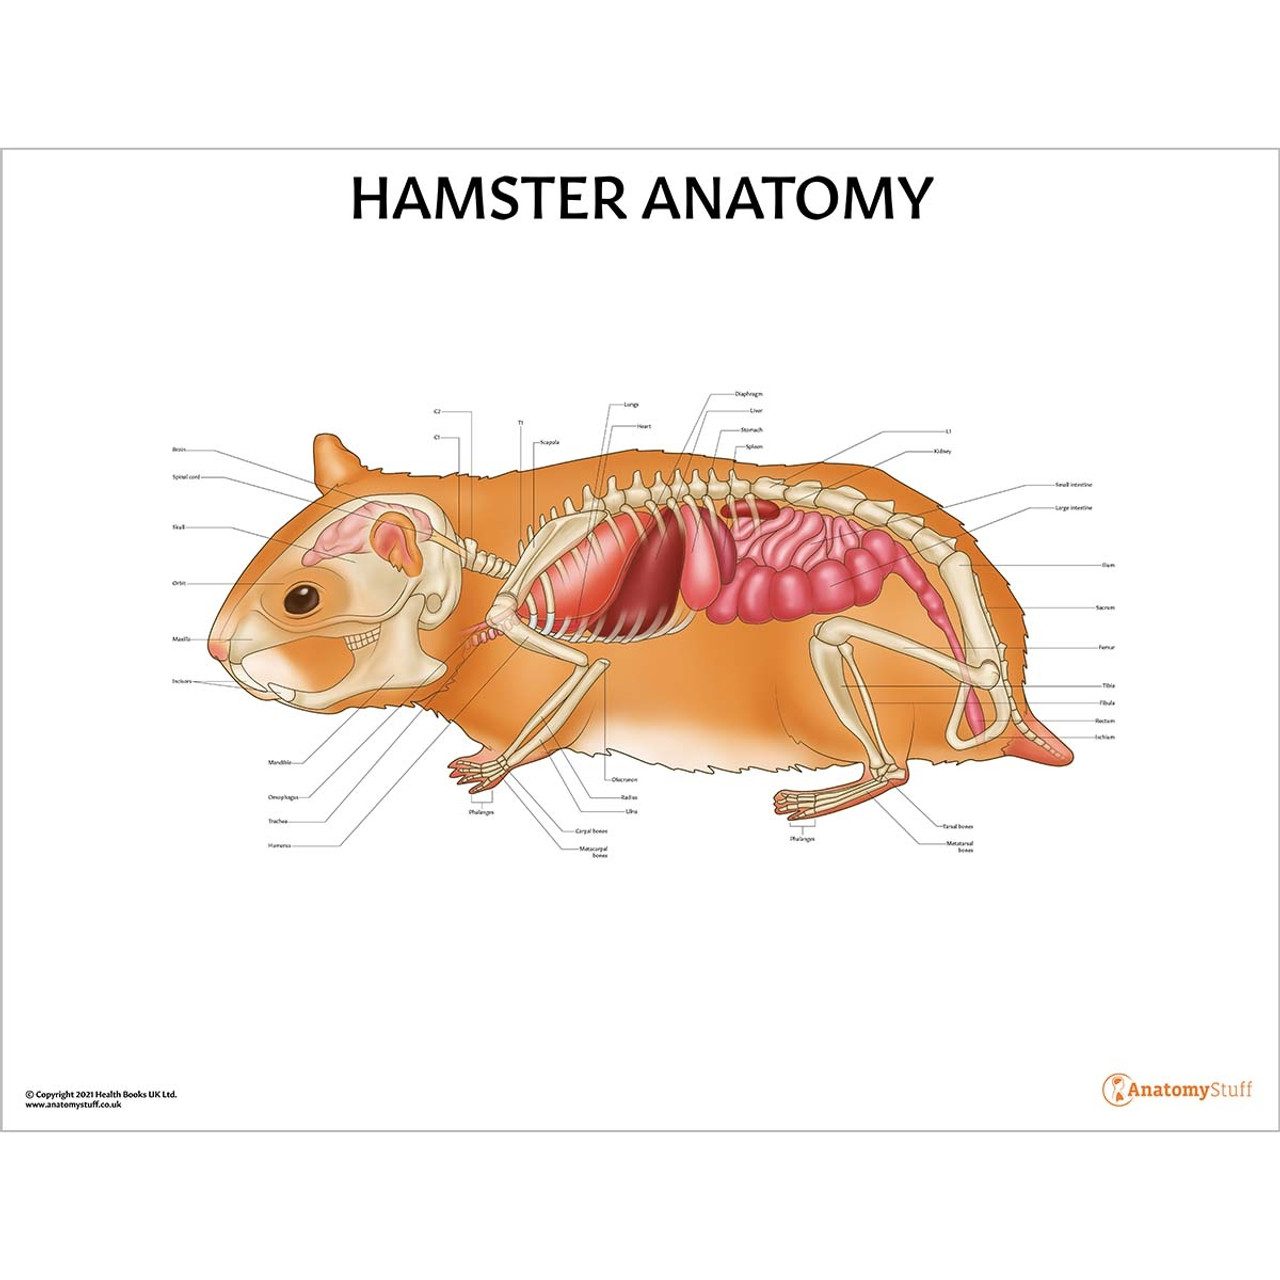 How Many Bones Does a Hamster Have